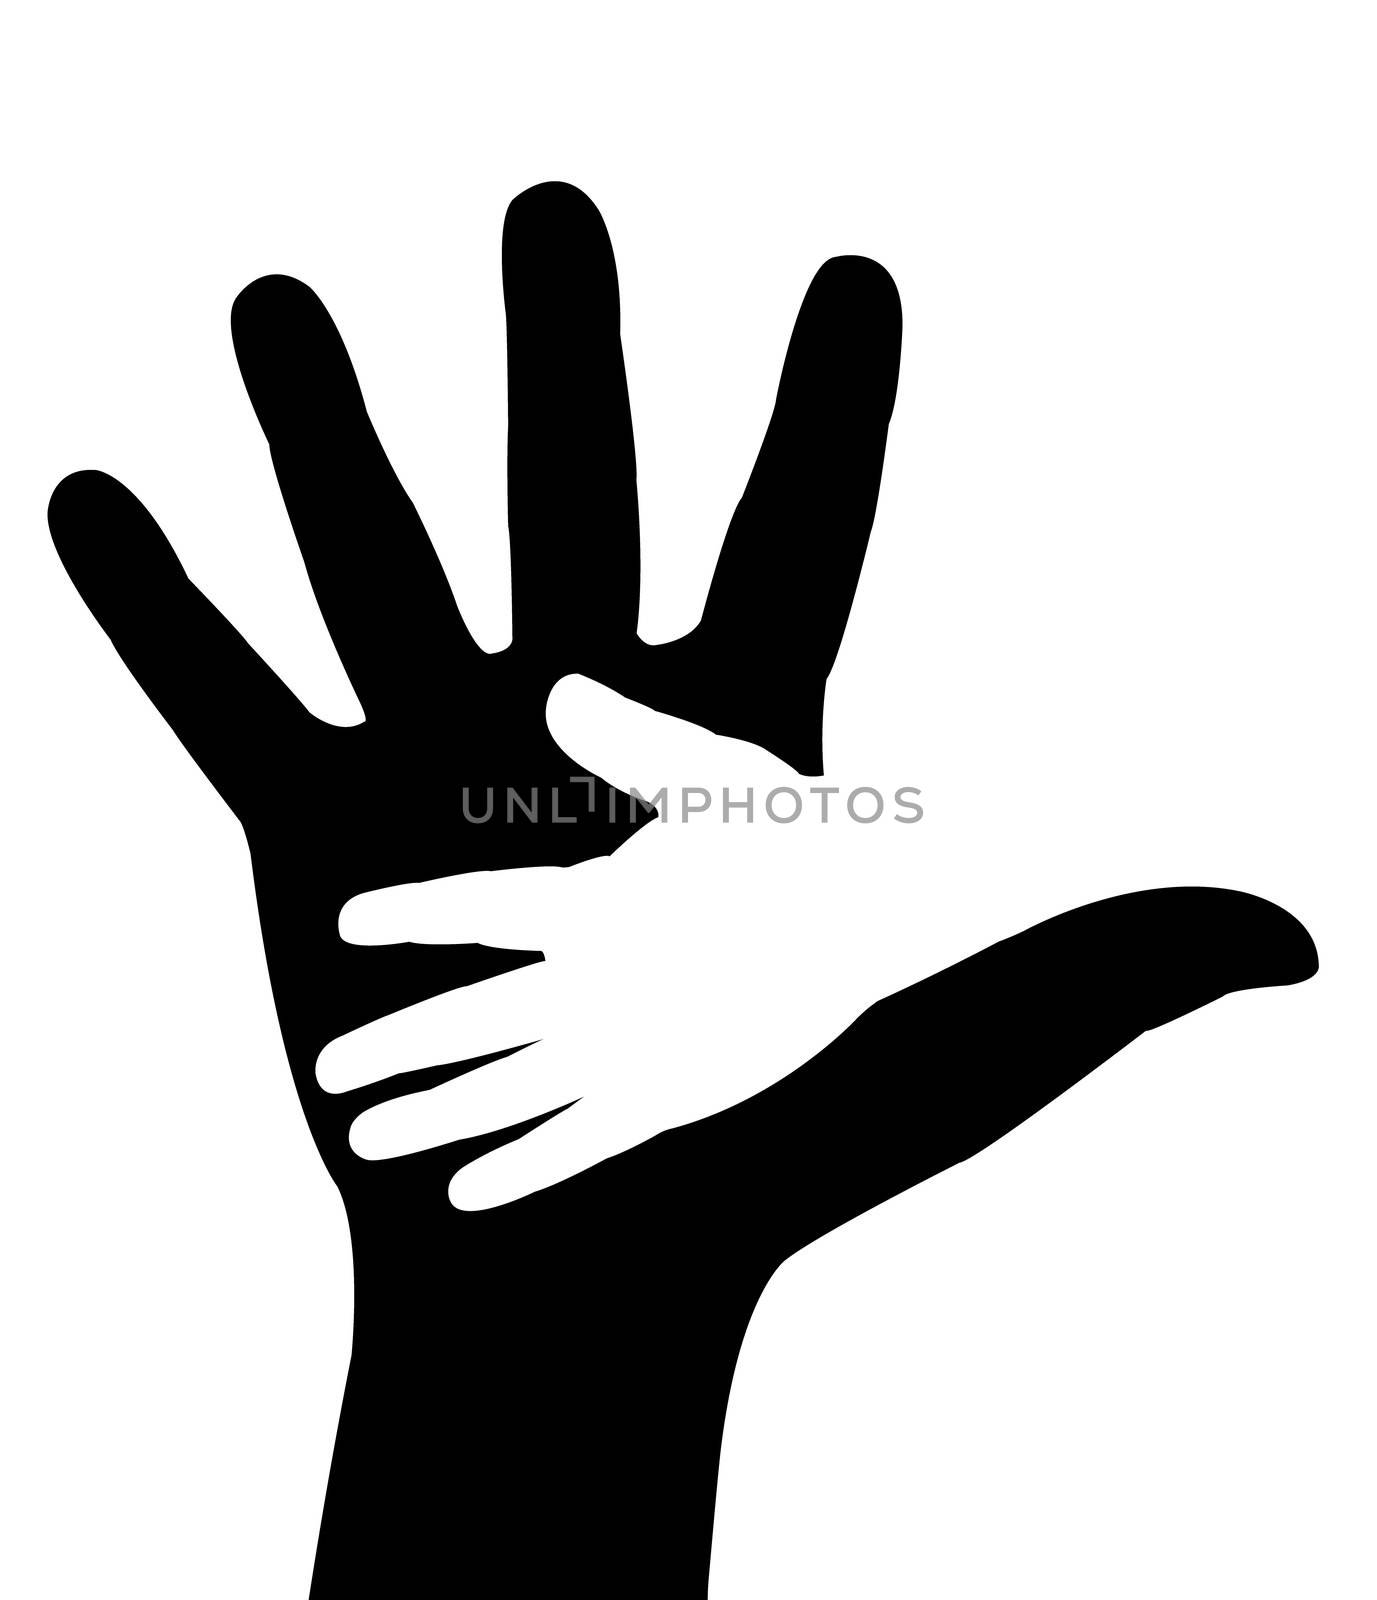 hands silhouette vector by Dr.G